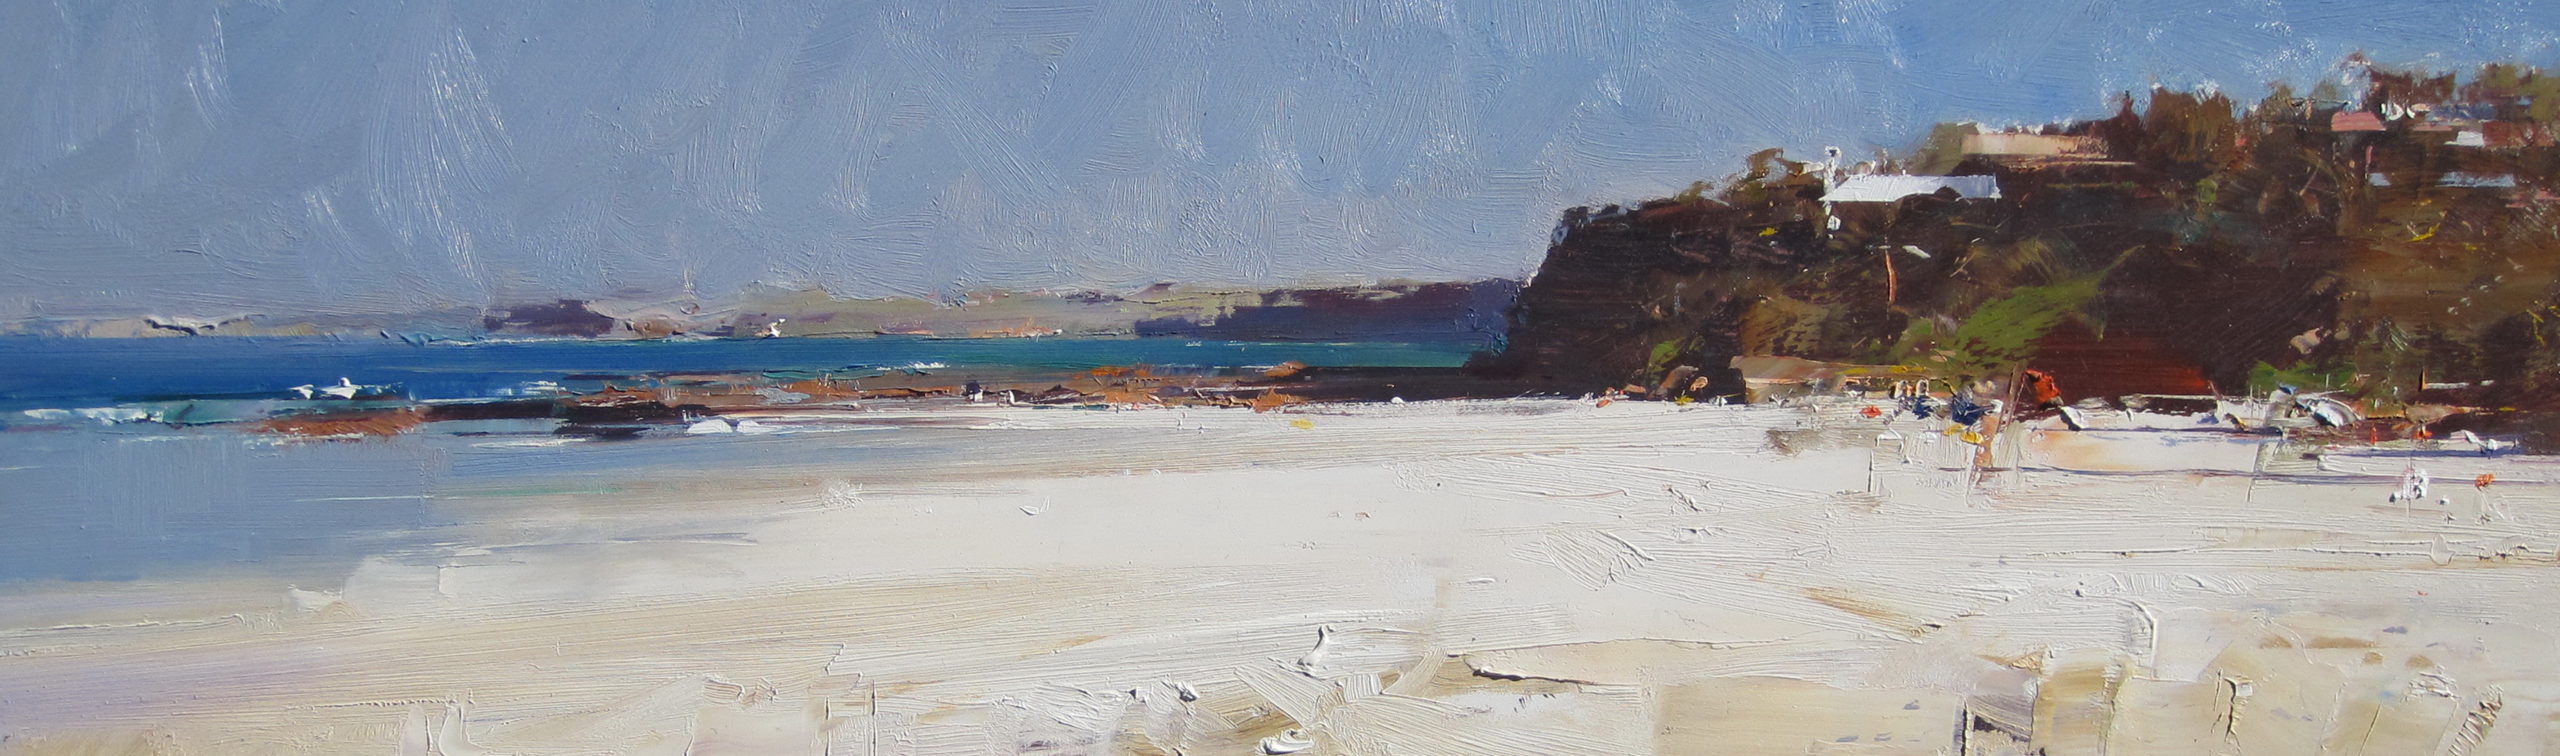 Ken Knight, "Summers Day on the Beach," 28 x 90 cm, Oil on panel